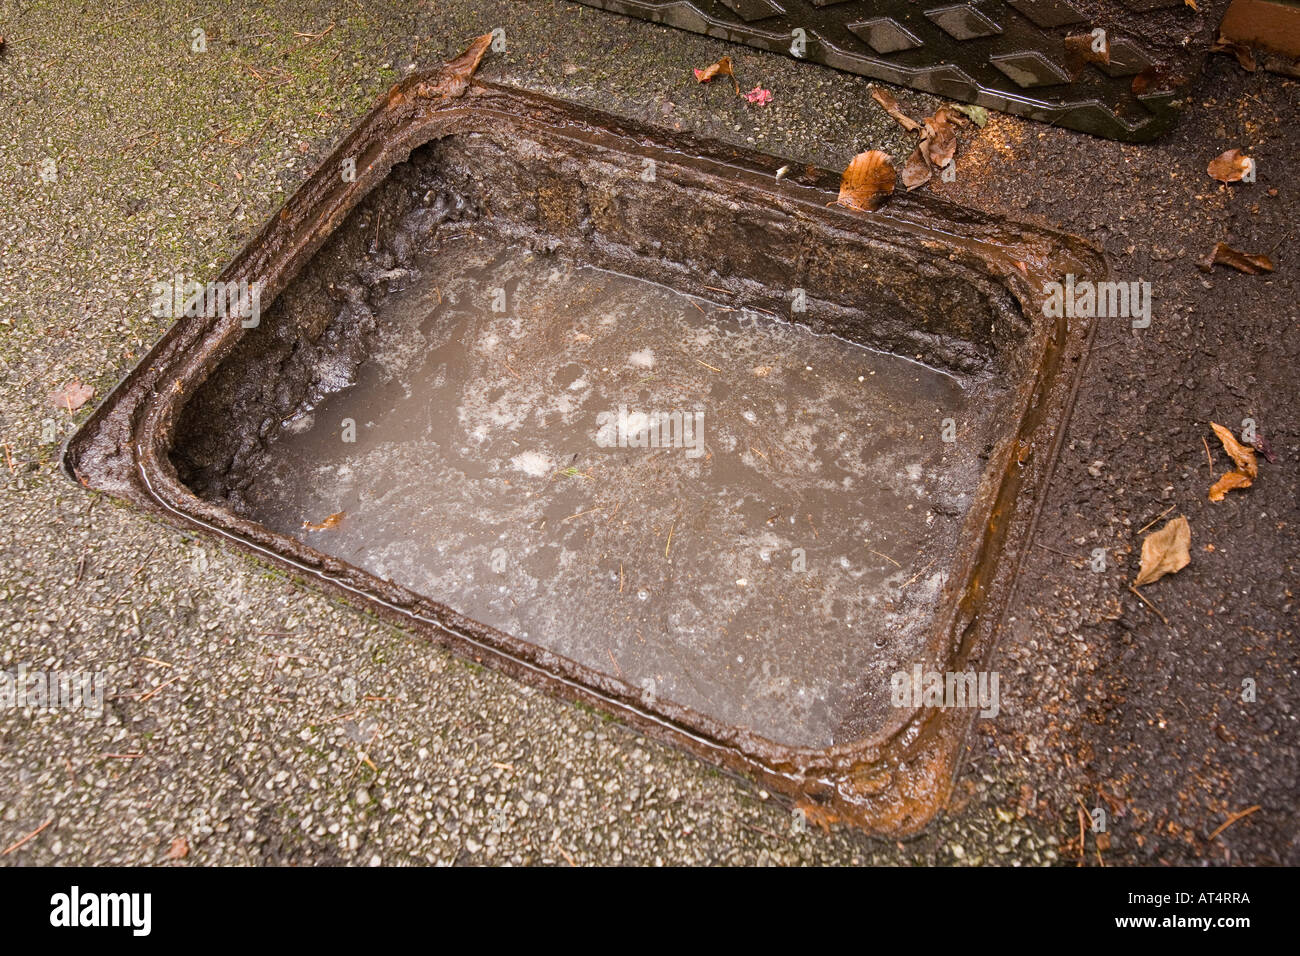 Blocked Sewer, Clogged Bath Drain With Fallen Out Hair Close Up, Hair Loss  In A BathroomStock Photo, Picture And Royalty Free ImageImage 135213957.